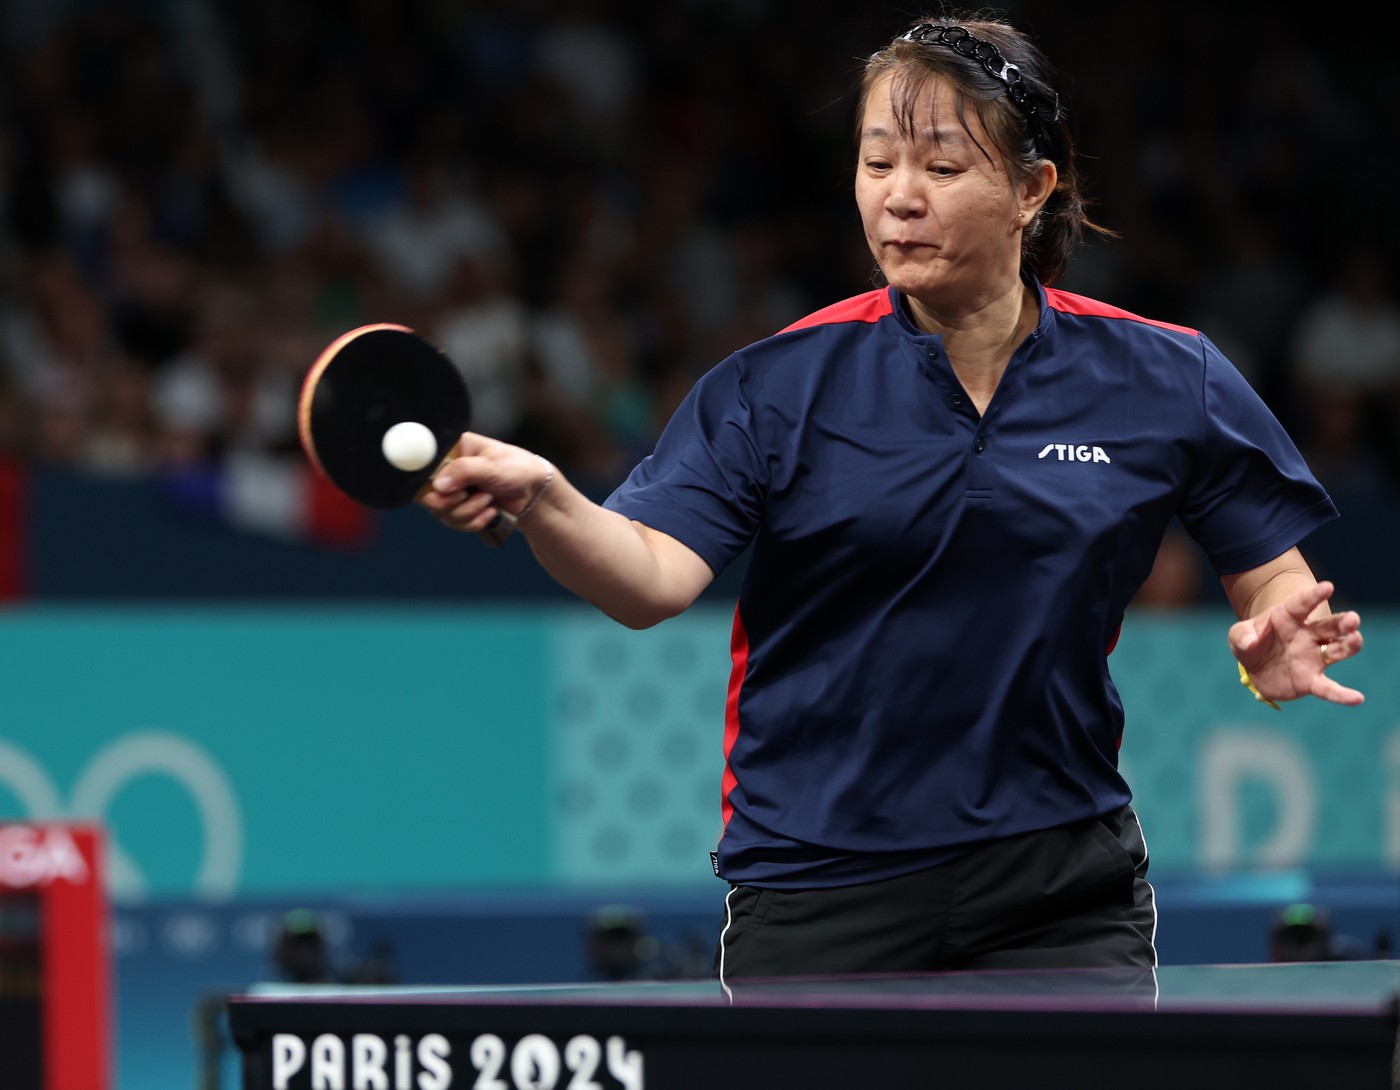 PARIS, July 27, 2024  -- Zeng Zhiying of Chile competes during women's singles preliminary round table tennis match against Mariana Sahakian of Lebanon at the Paris 2024 Olympic Games in Paris, France, on July 27, 2024.,Image: 893133610, License: Rights-managed, Restrictions: , Model Release: no